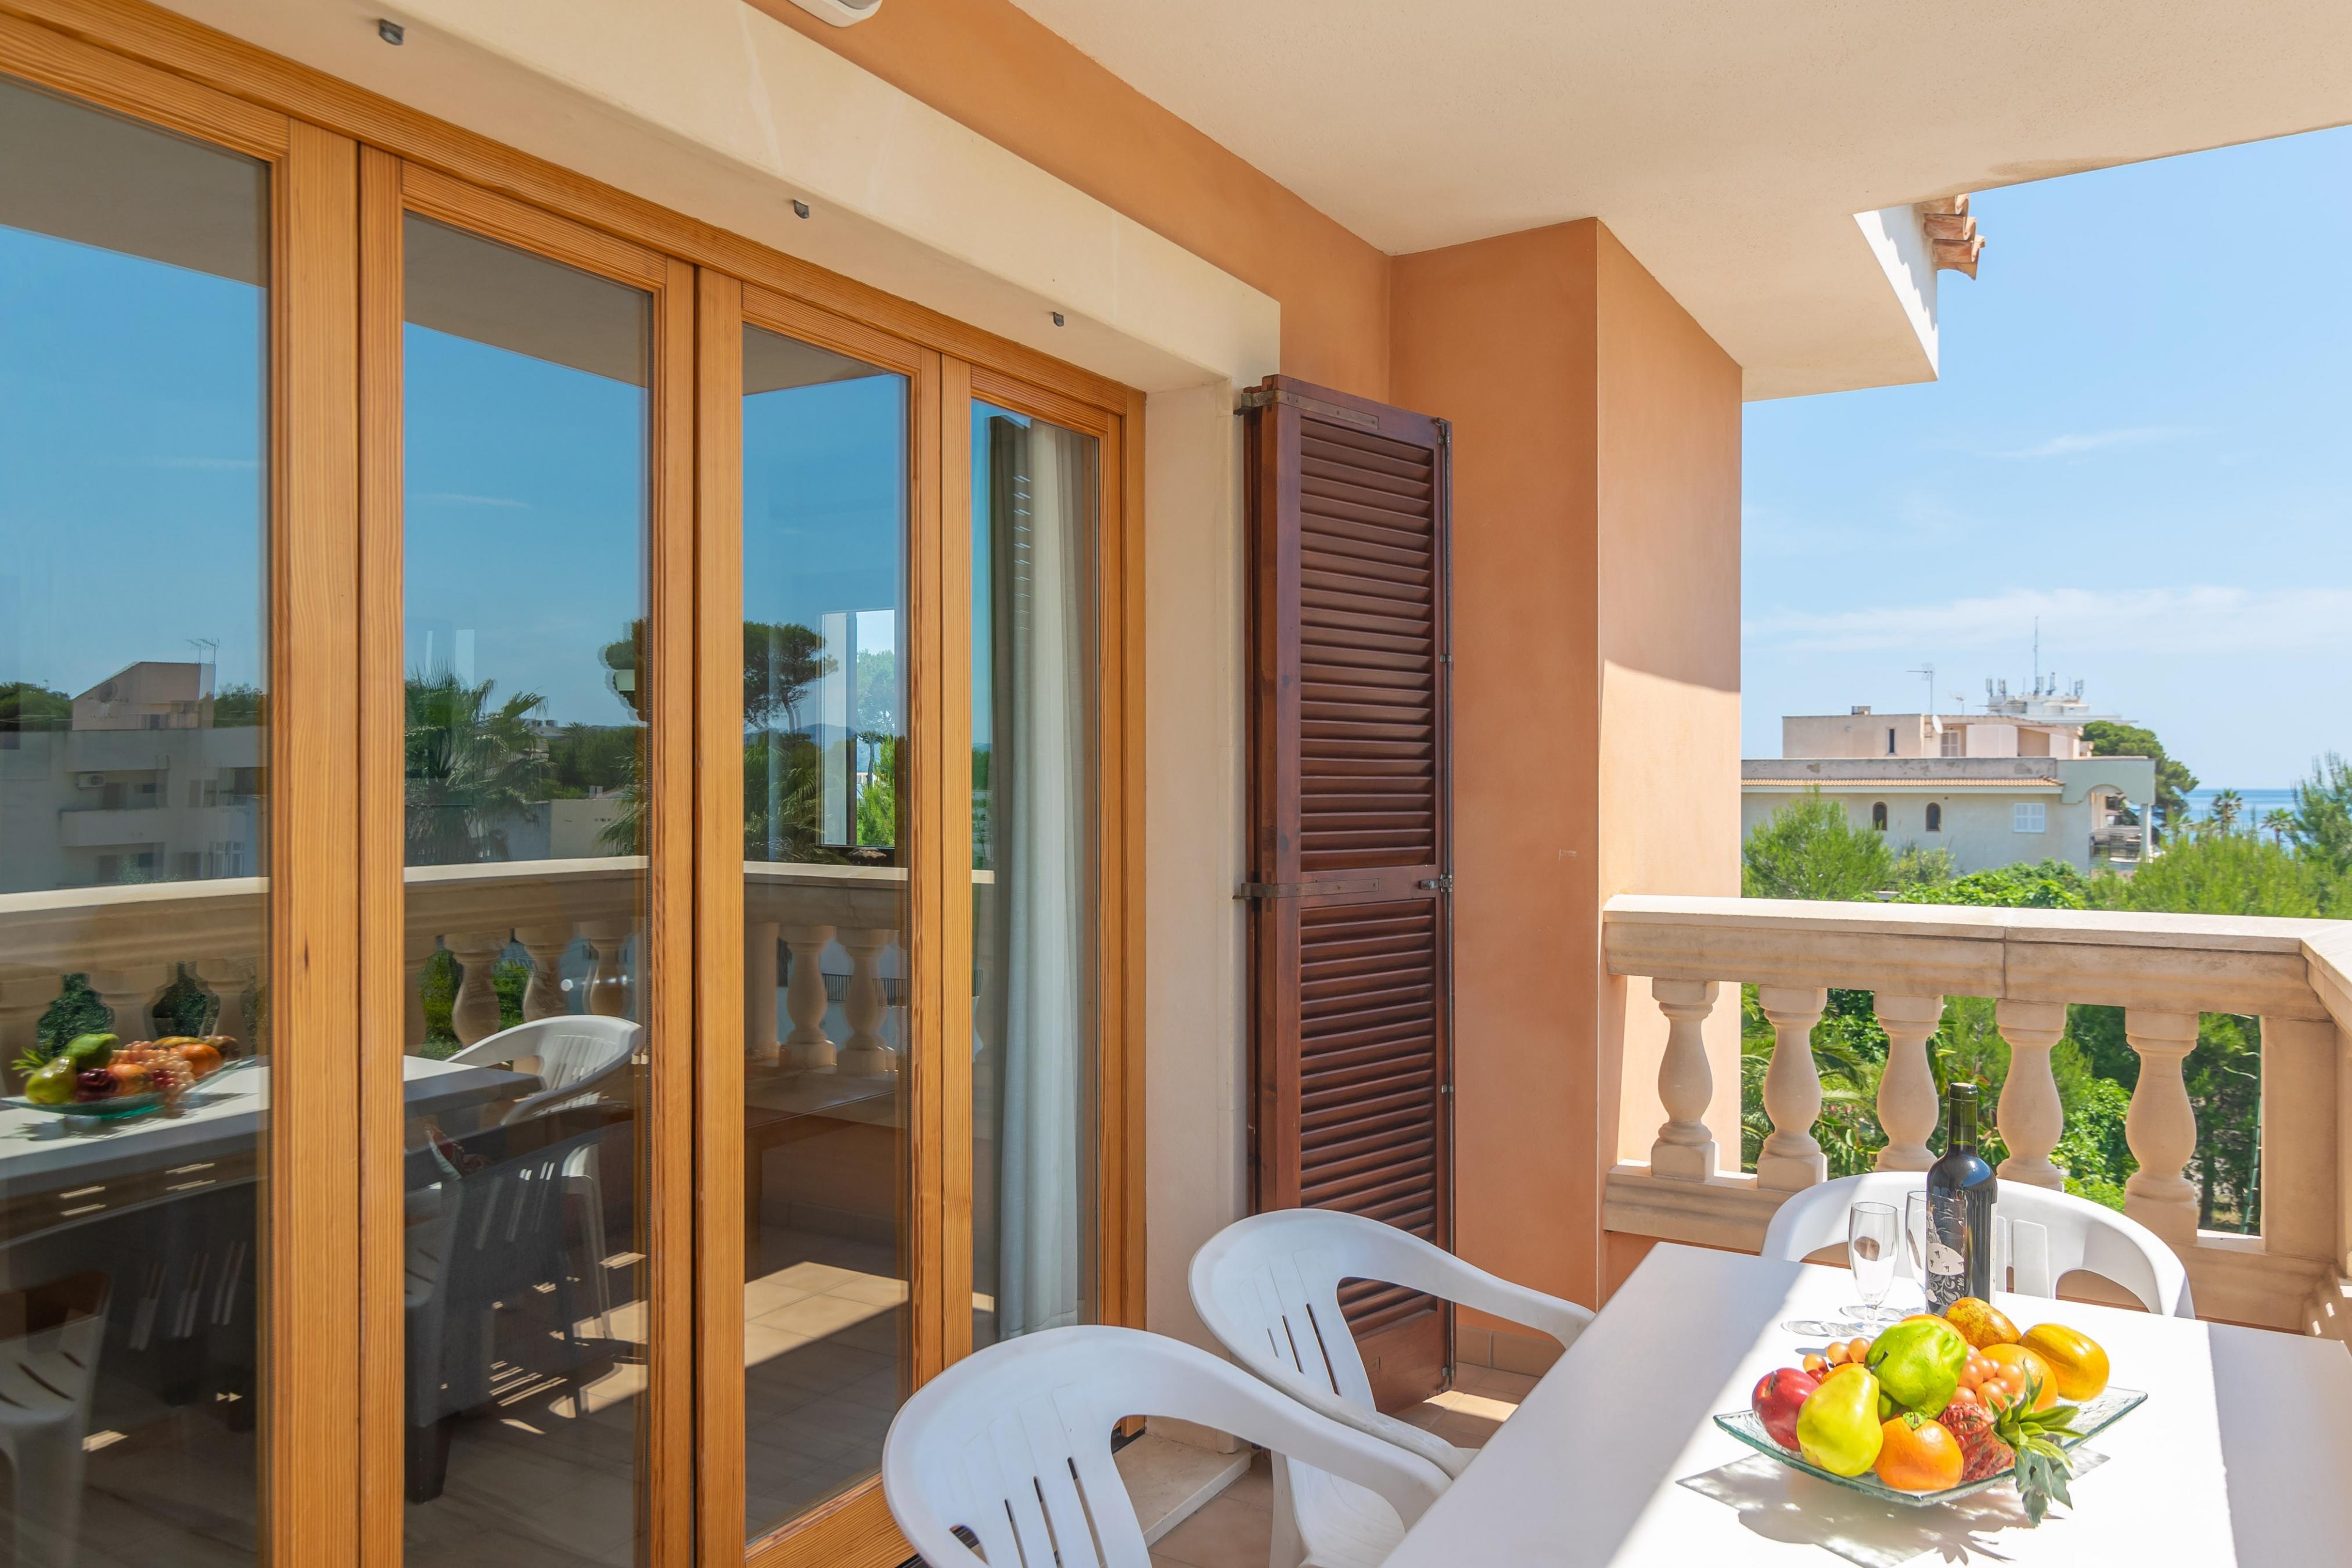 Property Image 1 - XIC MELO - Cozy apartment with terrace and close to the beach. Free WIFI.